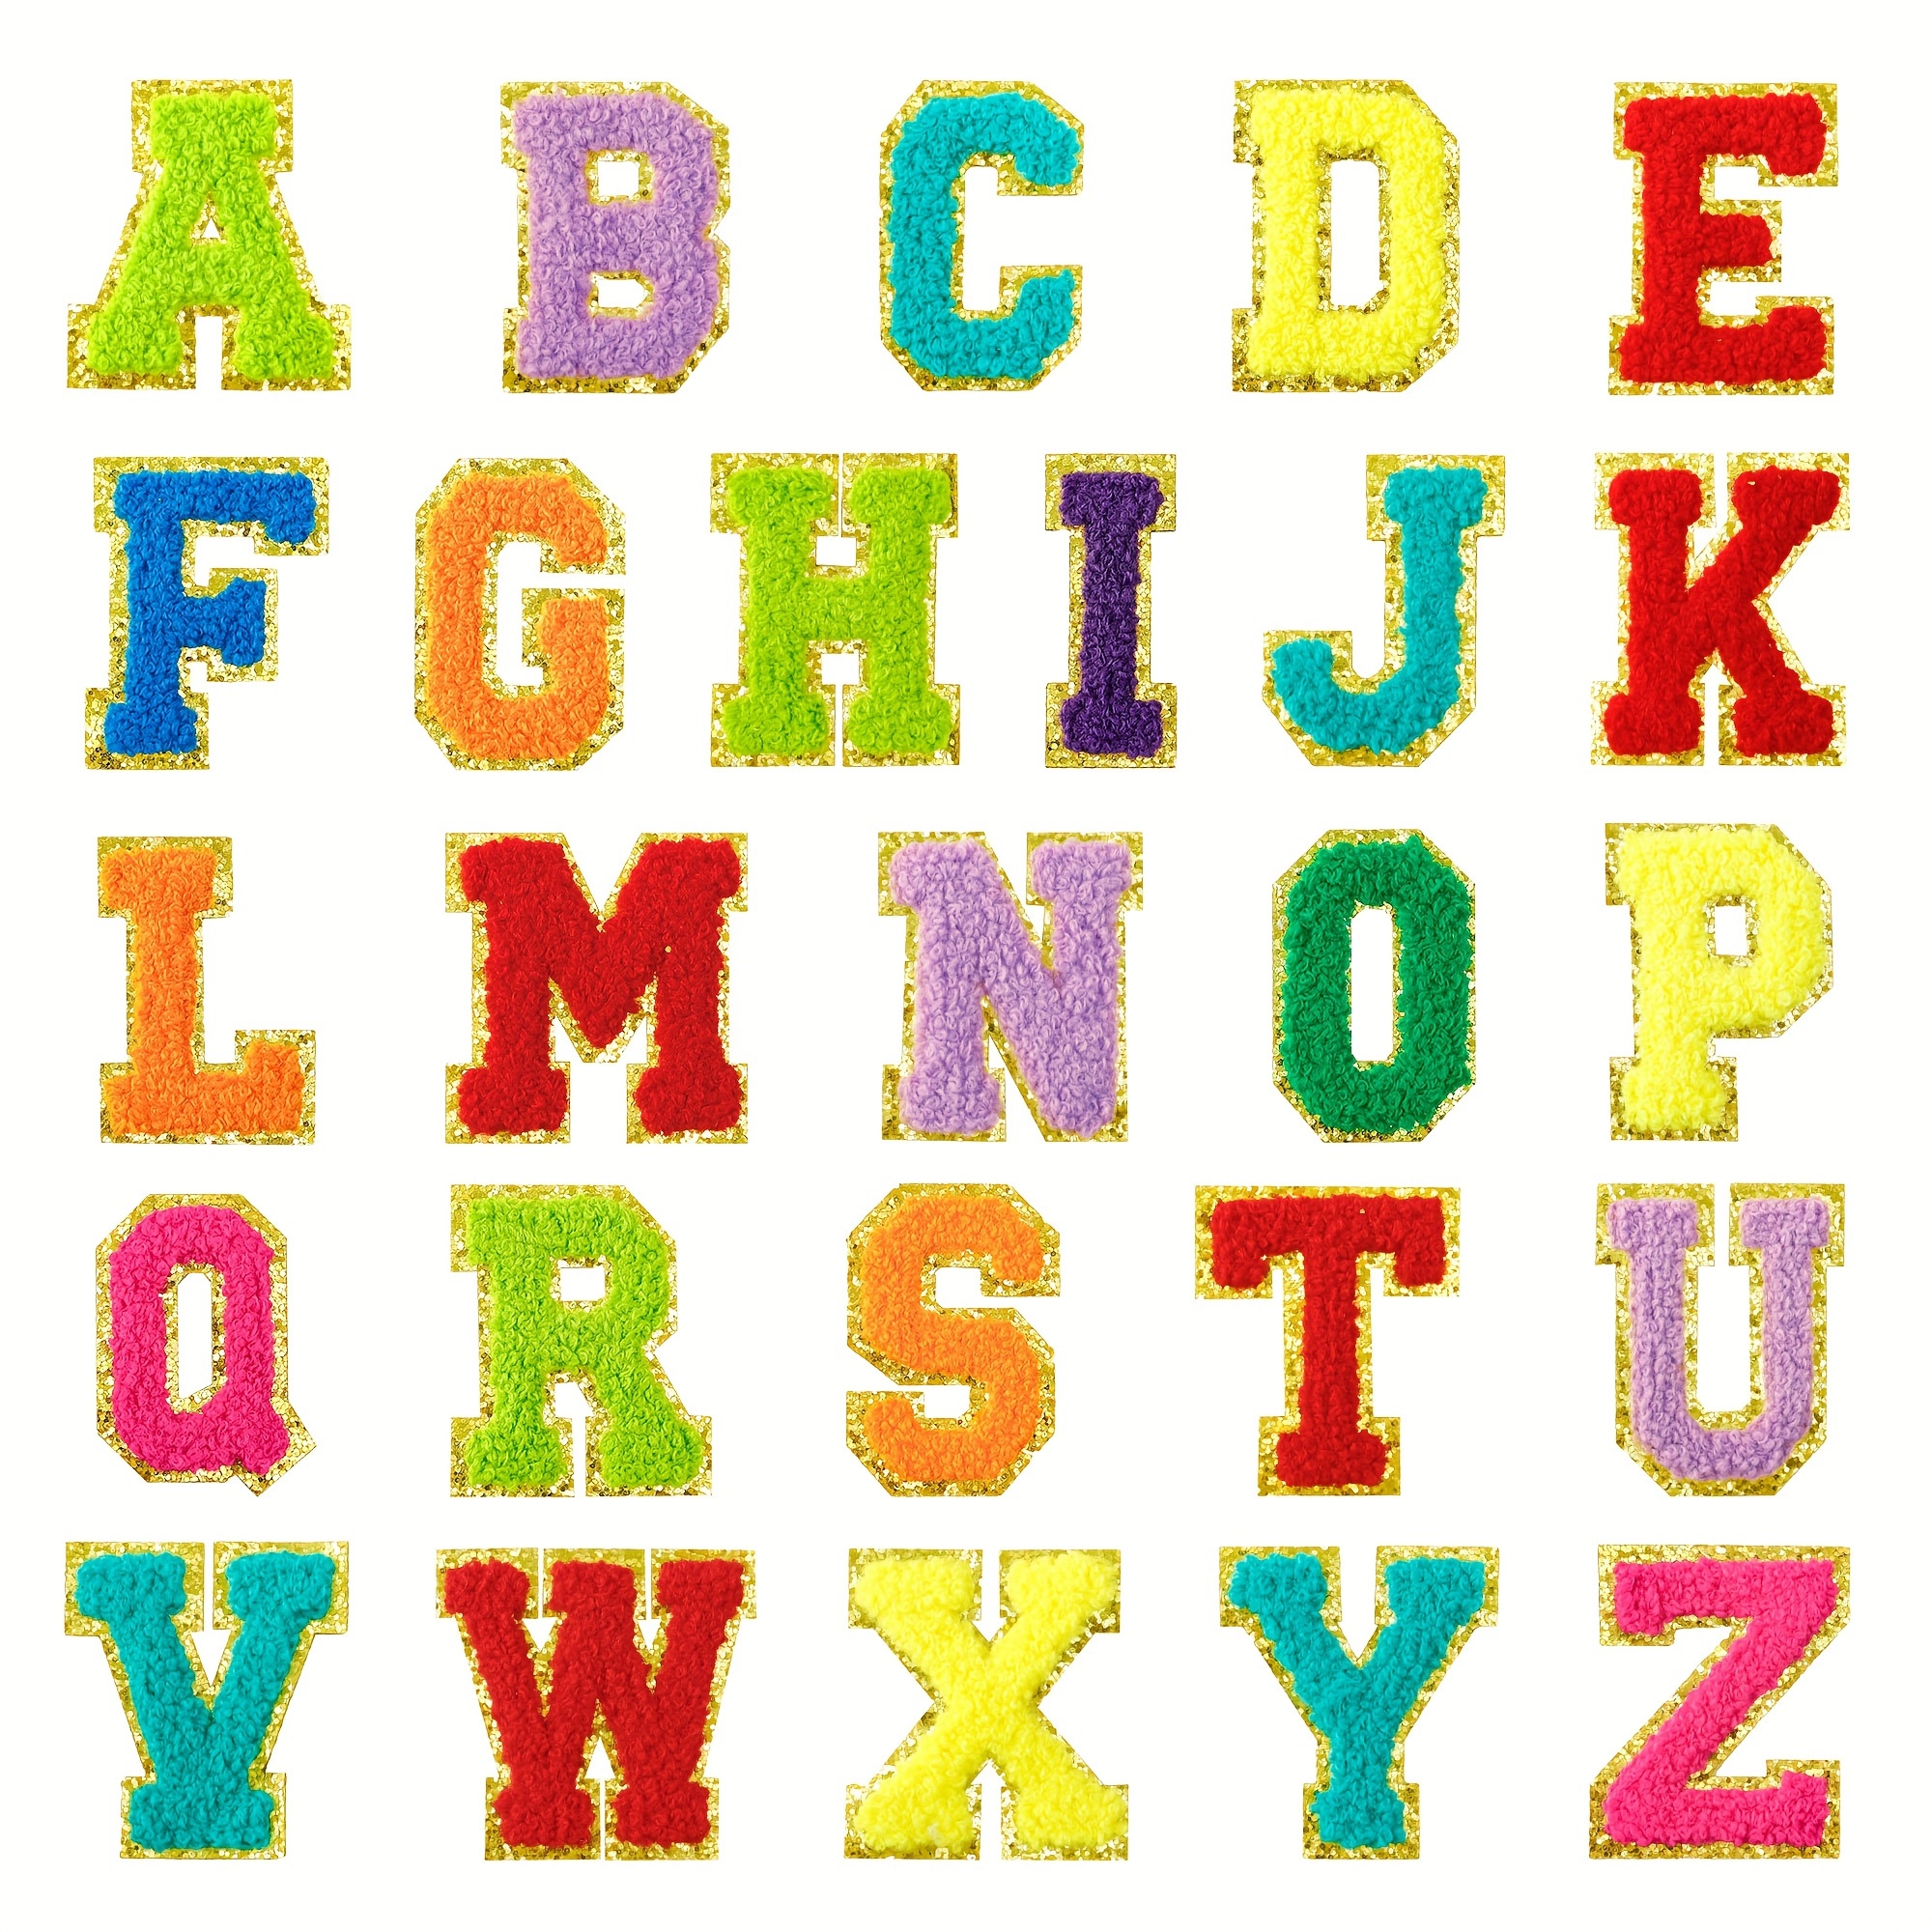 

26-piece Colorful Chenille Alphabet With Metallic Edging, Iron-on/sew-on Appliques For Diy Clothing, Hats, Bags - Decorative Fabric Accents